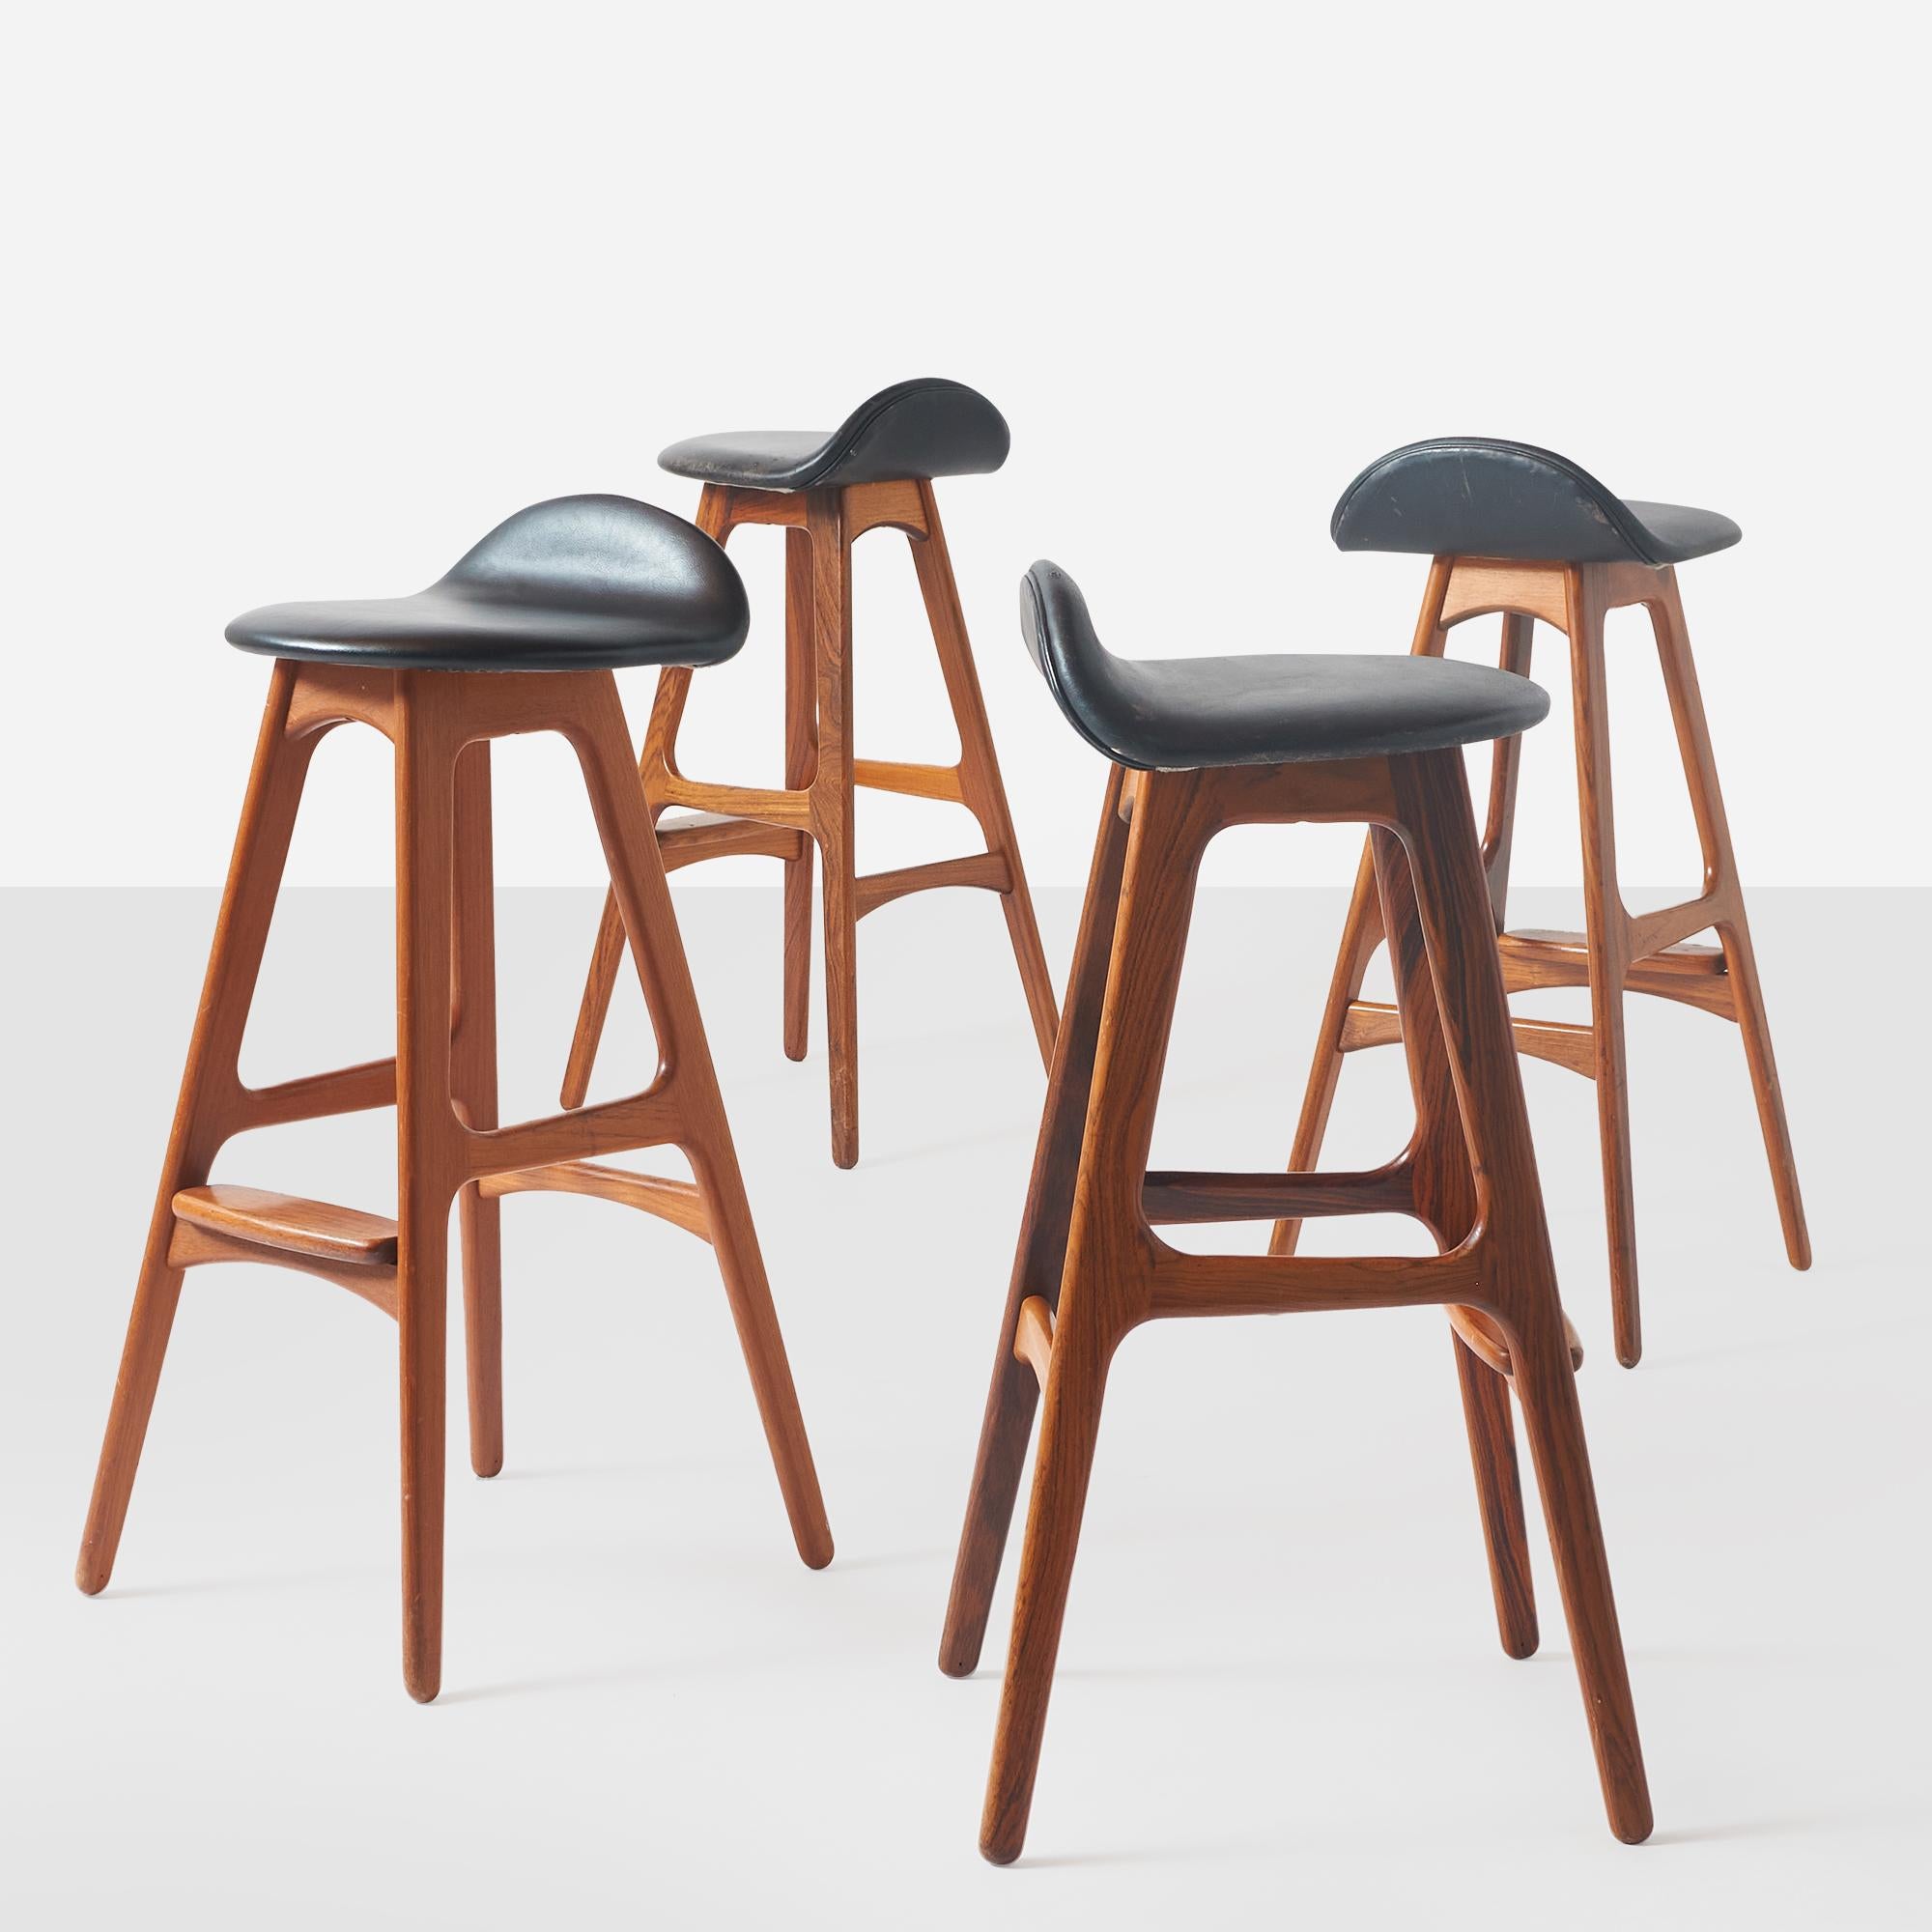 A set of 4 teak frame barstools designed by Erik Buch and produced by O.D. Mobler in Denmark. Each stool has black leather seat and a rosewood footrest. Retains manufacturers label.